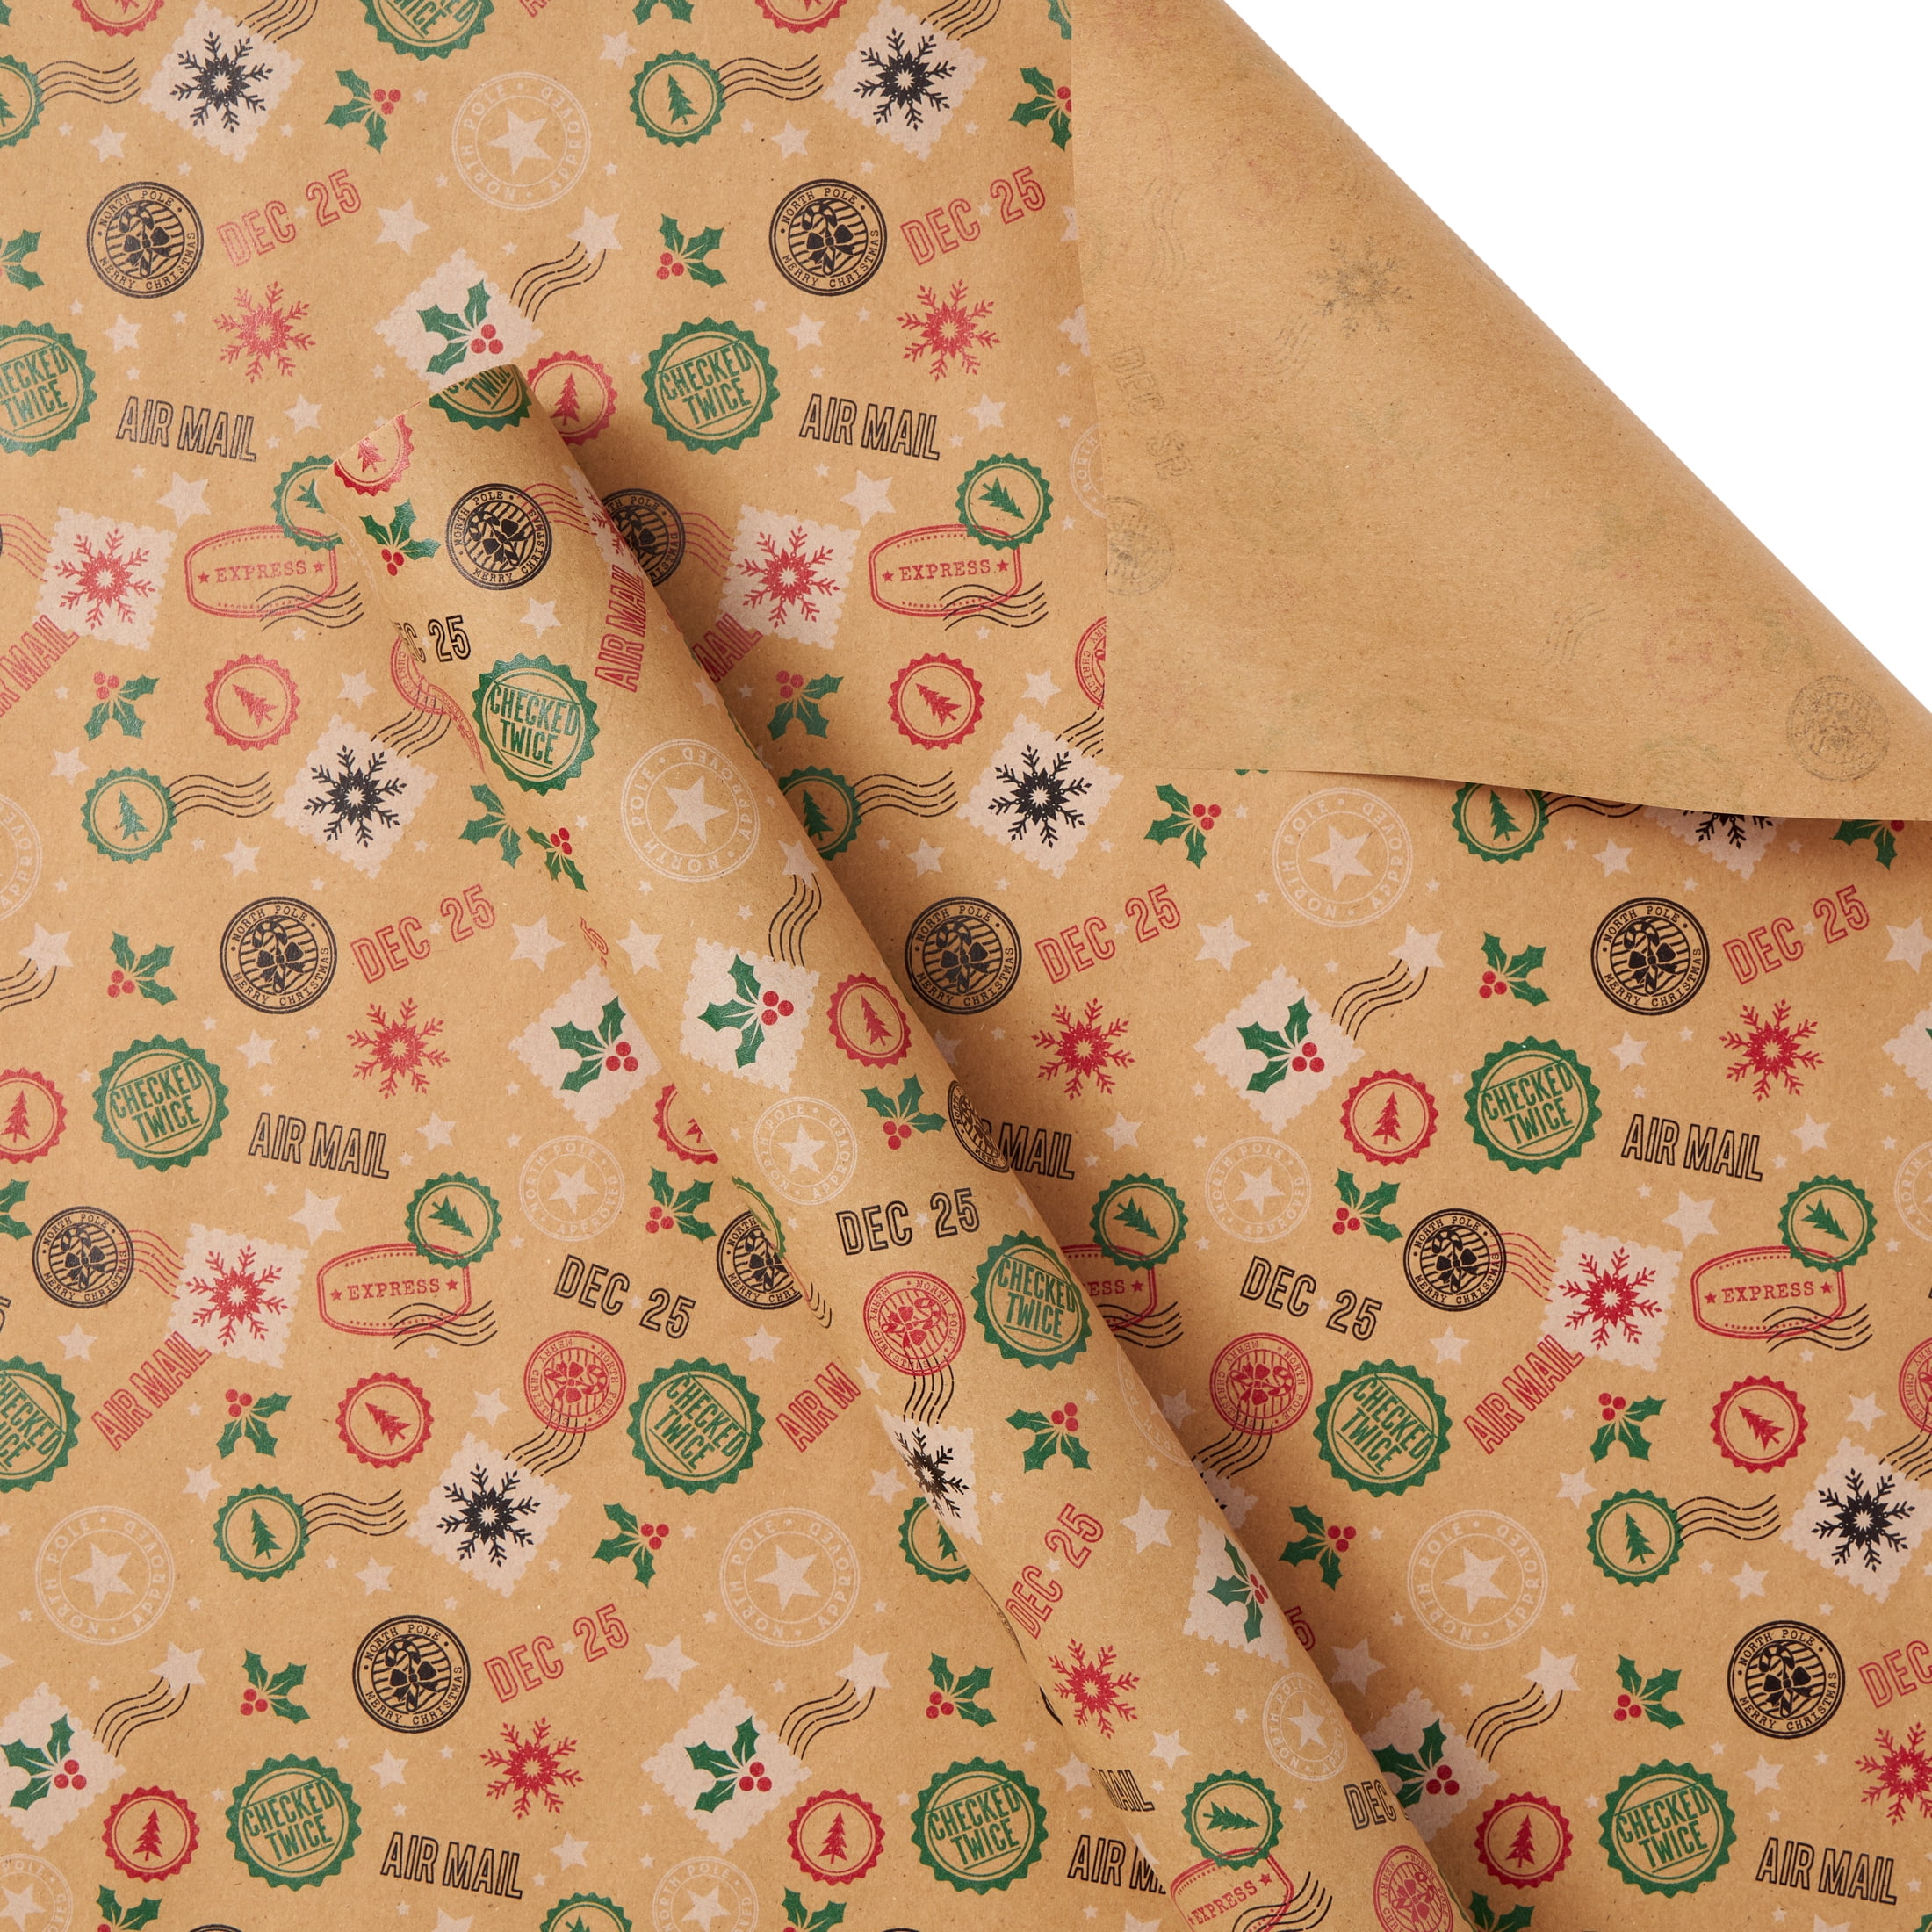 Introducing Personalized All-Occasion Wrapping Paper